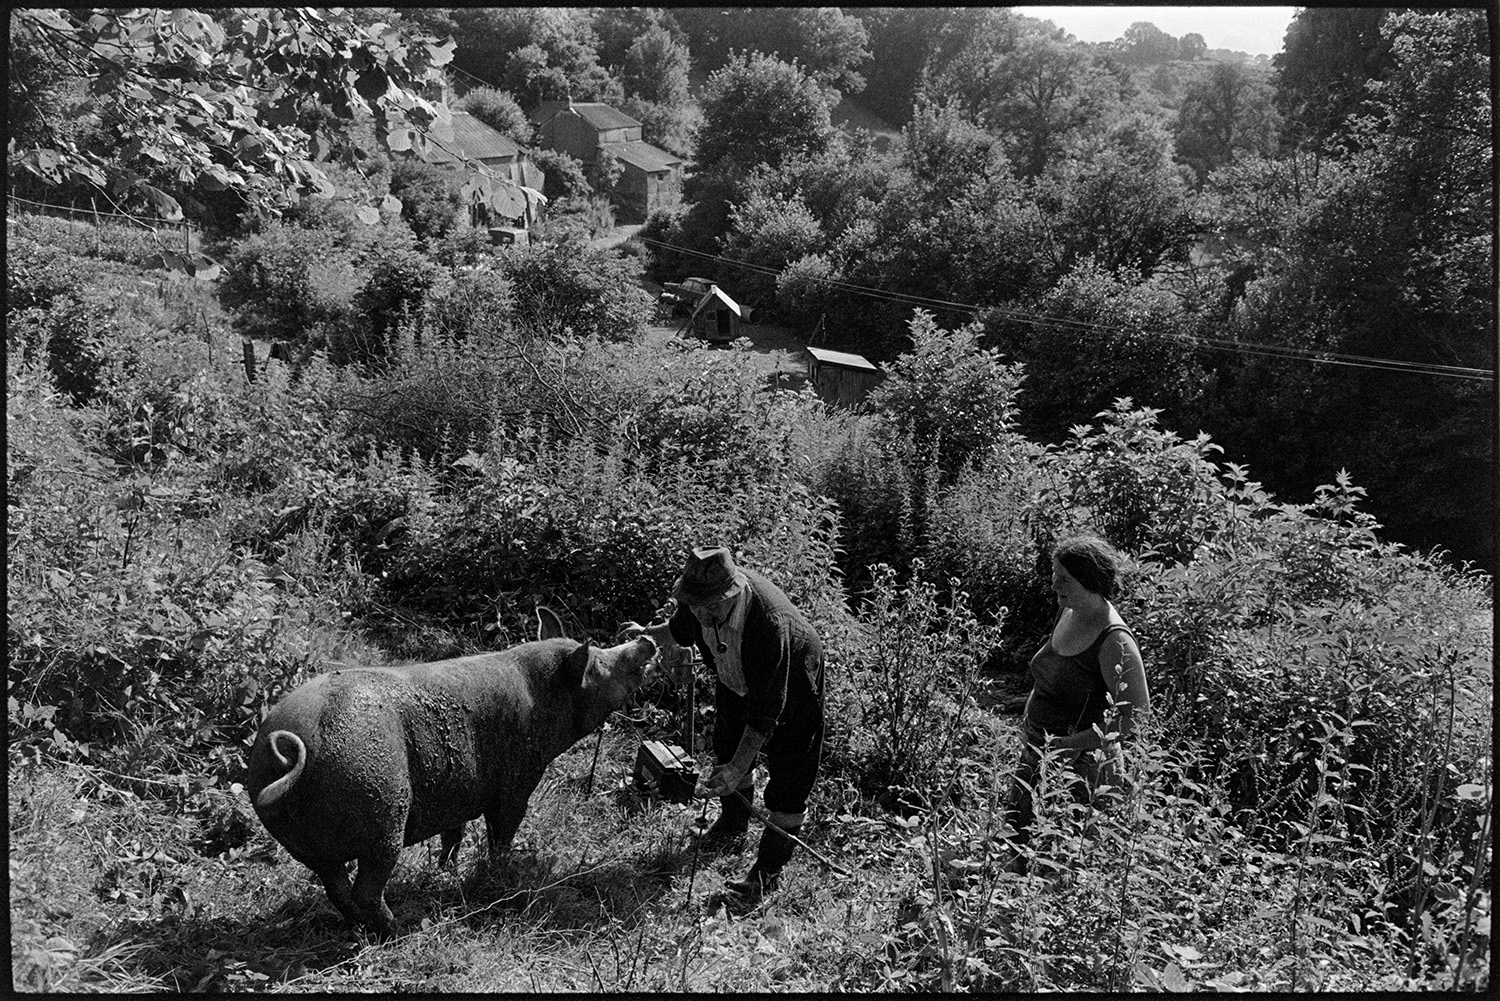 Feeding pigs and checking fences. 
[Archie Parkhouse and a woman checking an electric fence to keep a pig in an overgrown area, at Millhams, Dolton. Archie is smoking a pipe. Woodland and cottages are visible in the valley in the background.]